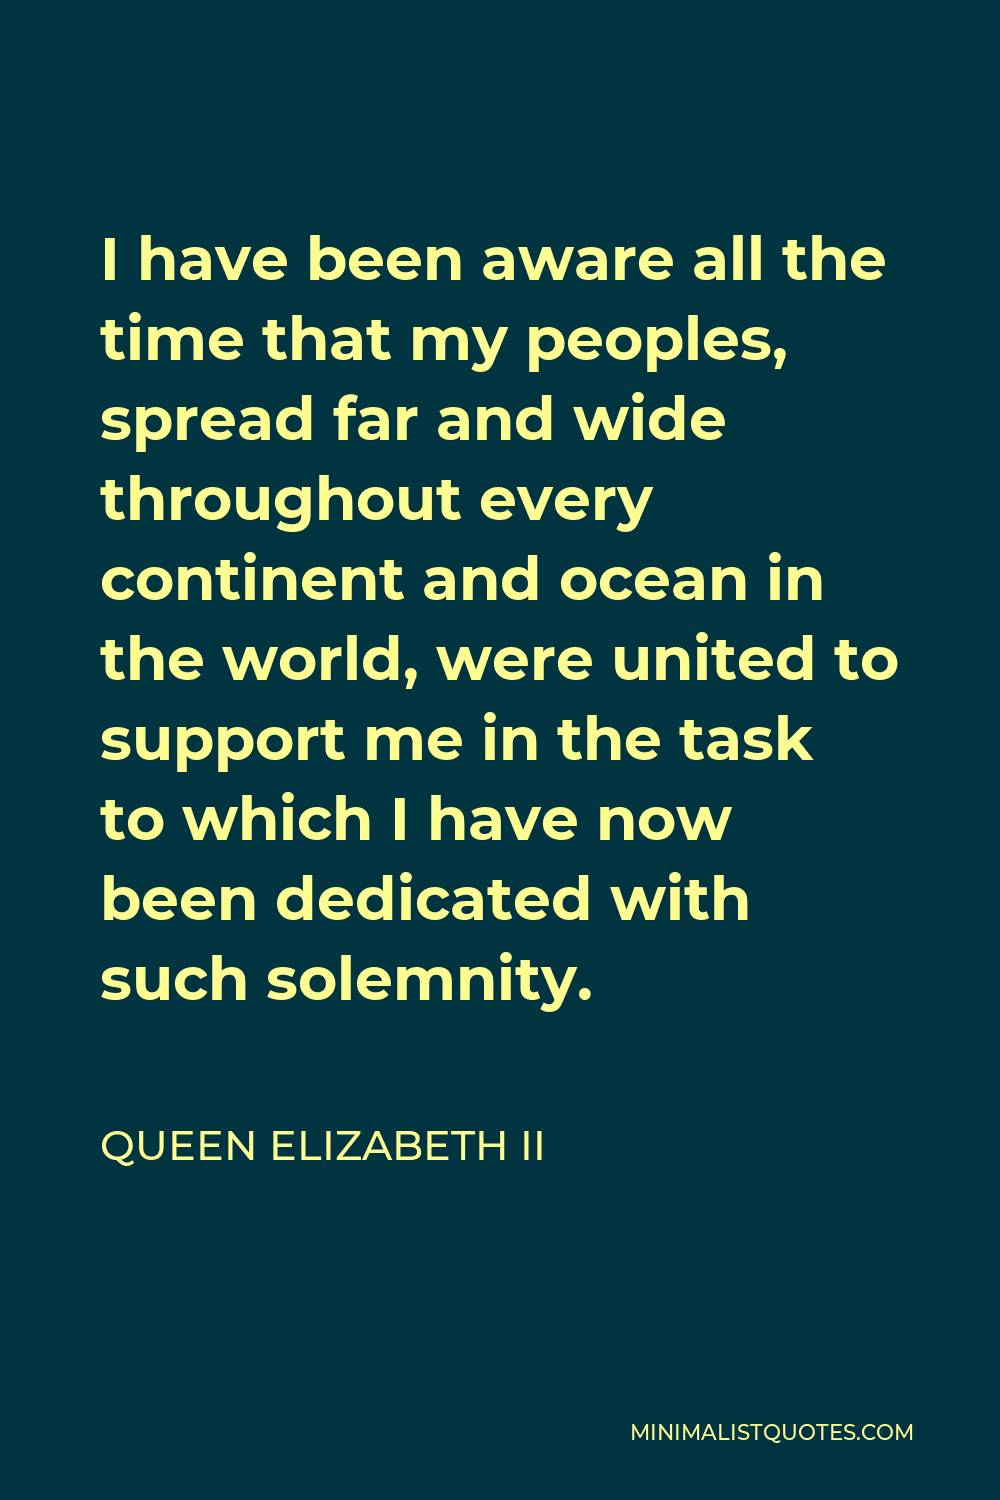 Queen Elizabeth II Quote - I have been aware all the time that my peoples, spread far and wide throughout every continent and ocean in the world, were united to support me in the task to which I have now been dedicated with such solemnity.